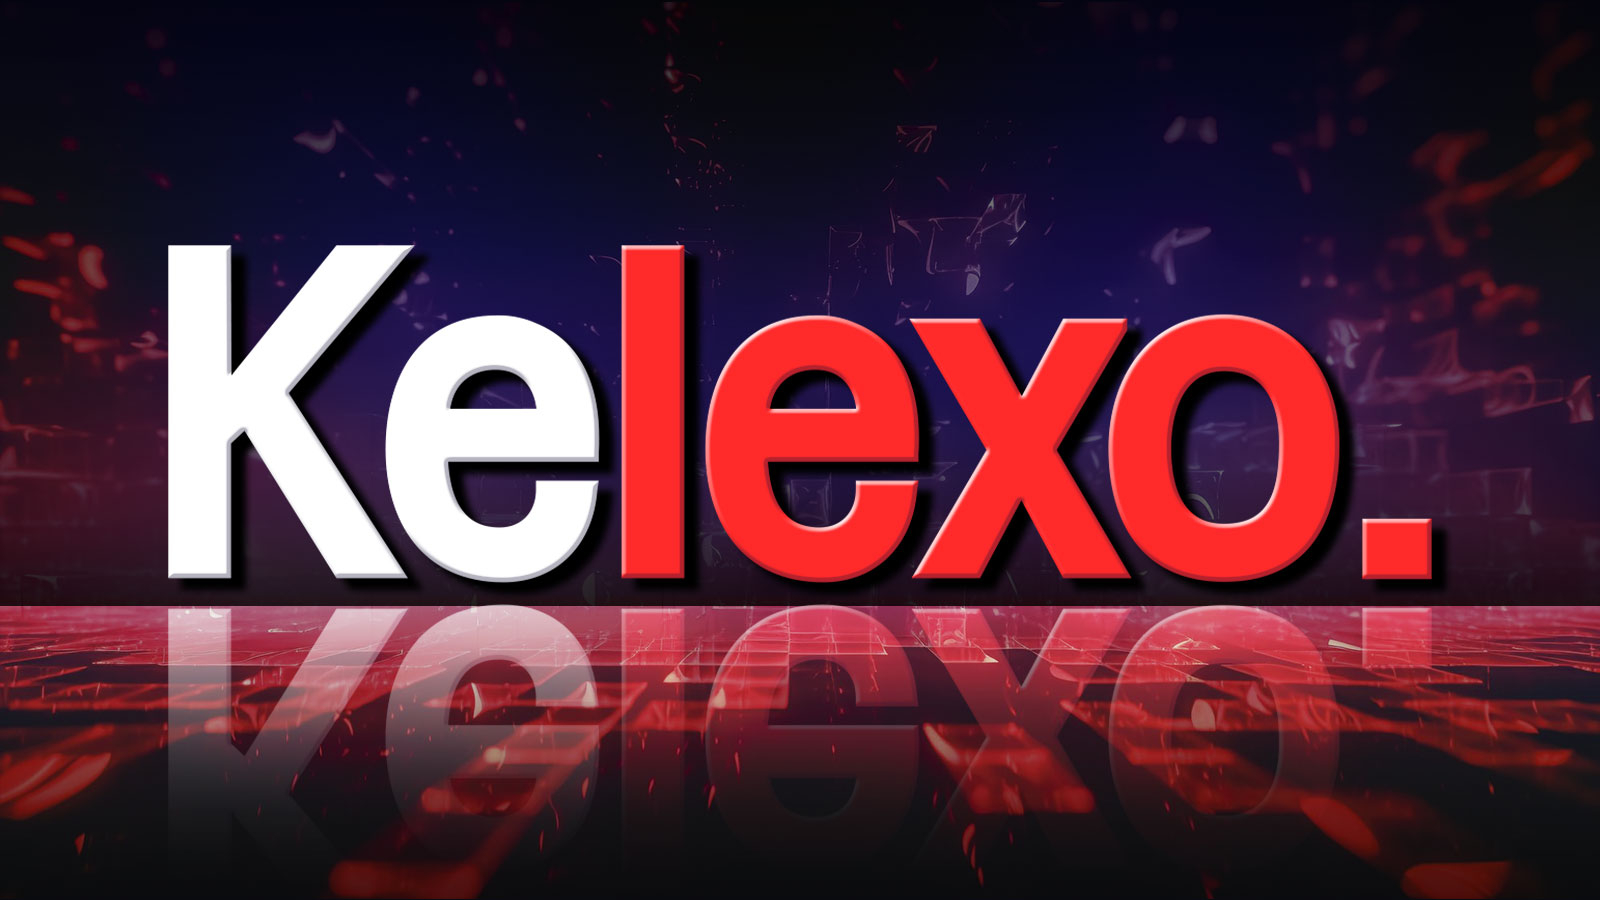 Kelexo (KLXO) Pre-Sale Gaining Attention in March as Ethereum (ETH), U.S. Dollar Tether (USDT) Set Trading Volume Records